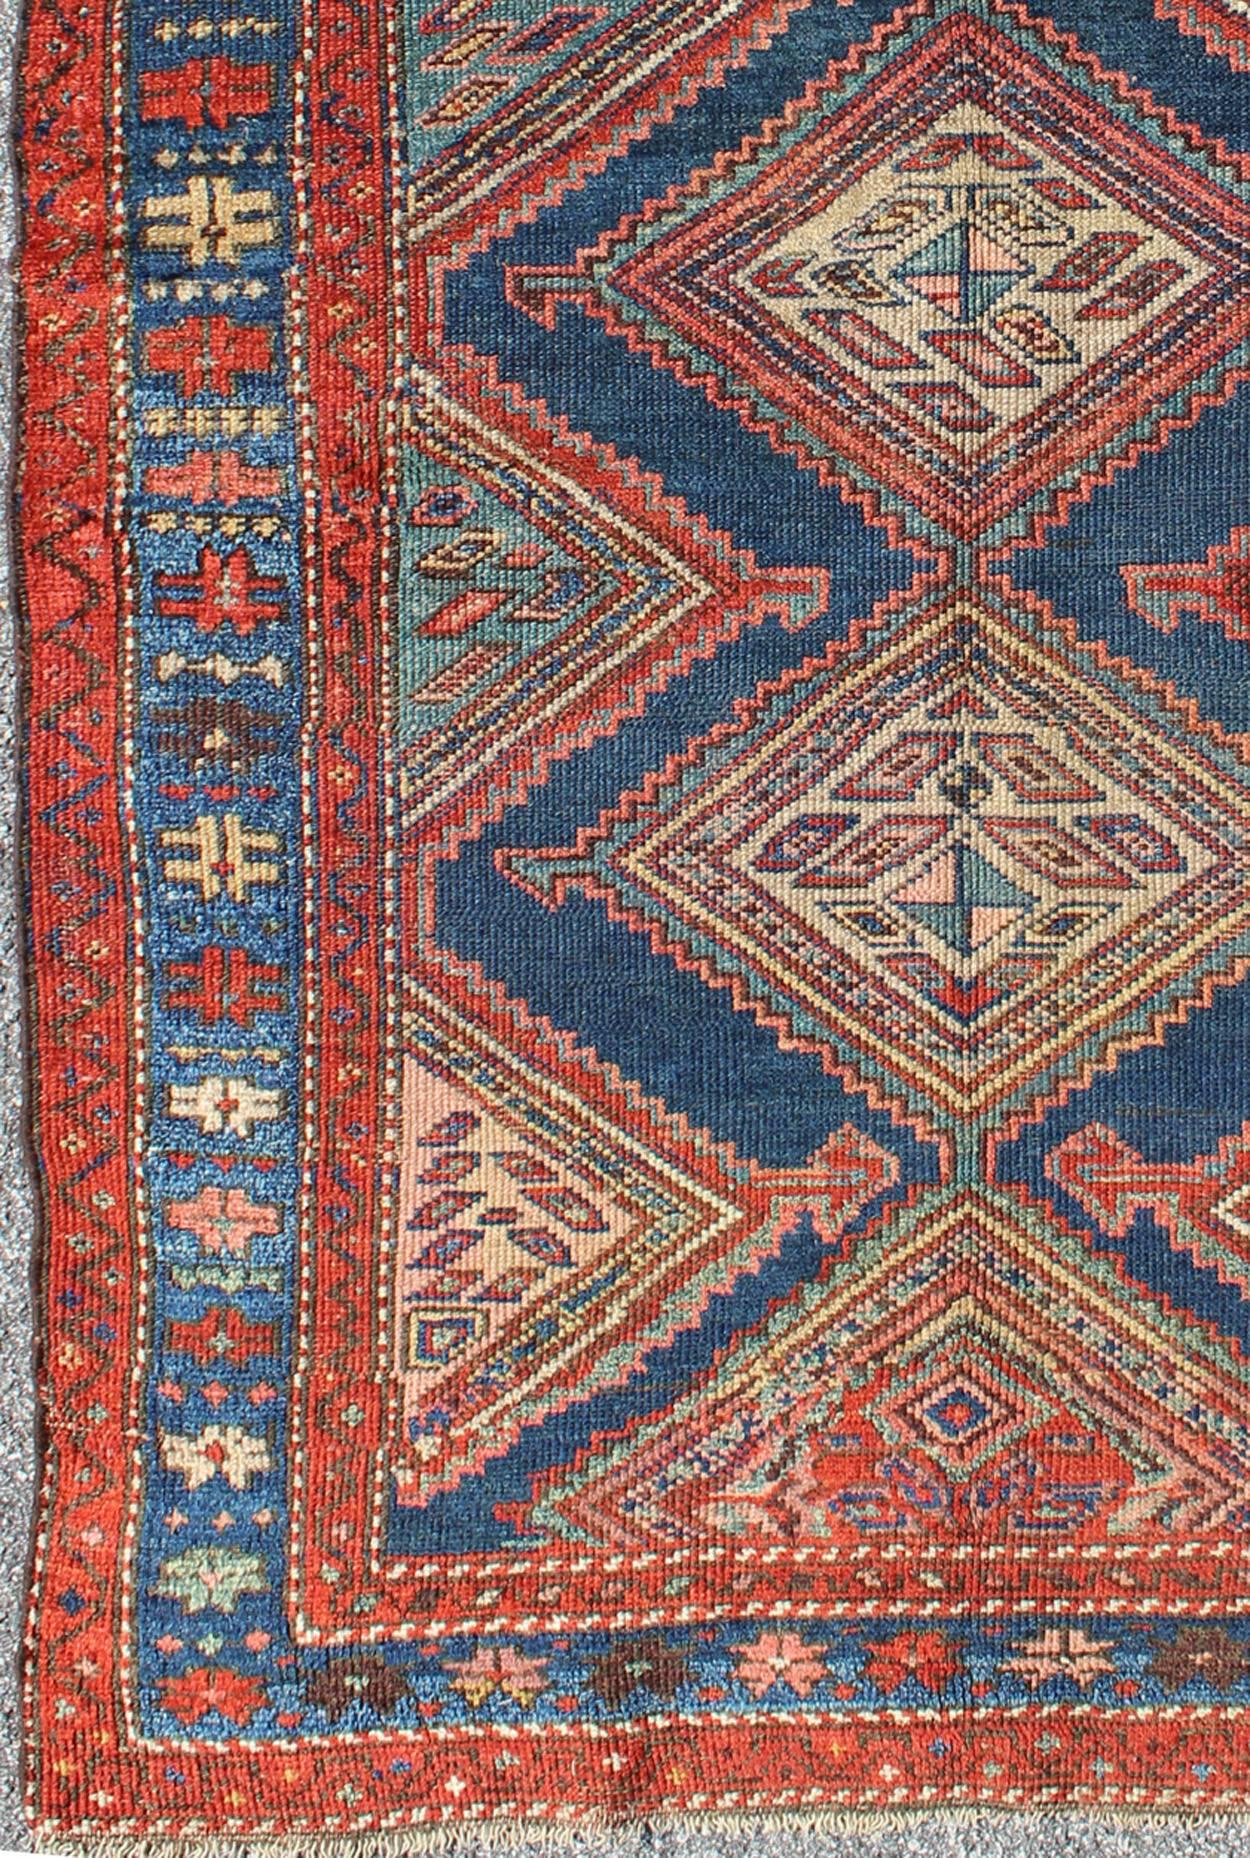 Jewel-toned antique N.W. Persian tribal Malayer rug with diamond medallion design, rug h8-0407, country of origin / type: Iran / N.W. Persian Tribal, circa 1910

This jewel-toned antique N.W. Persian rug, circa 1910, features a unique blend of